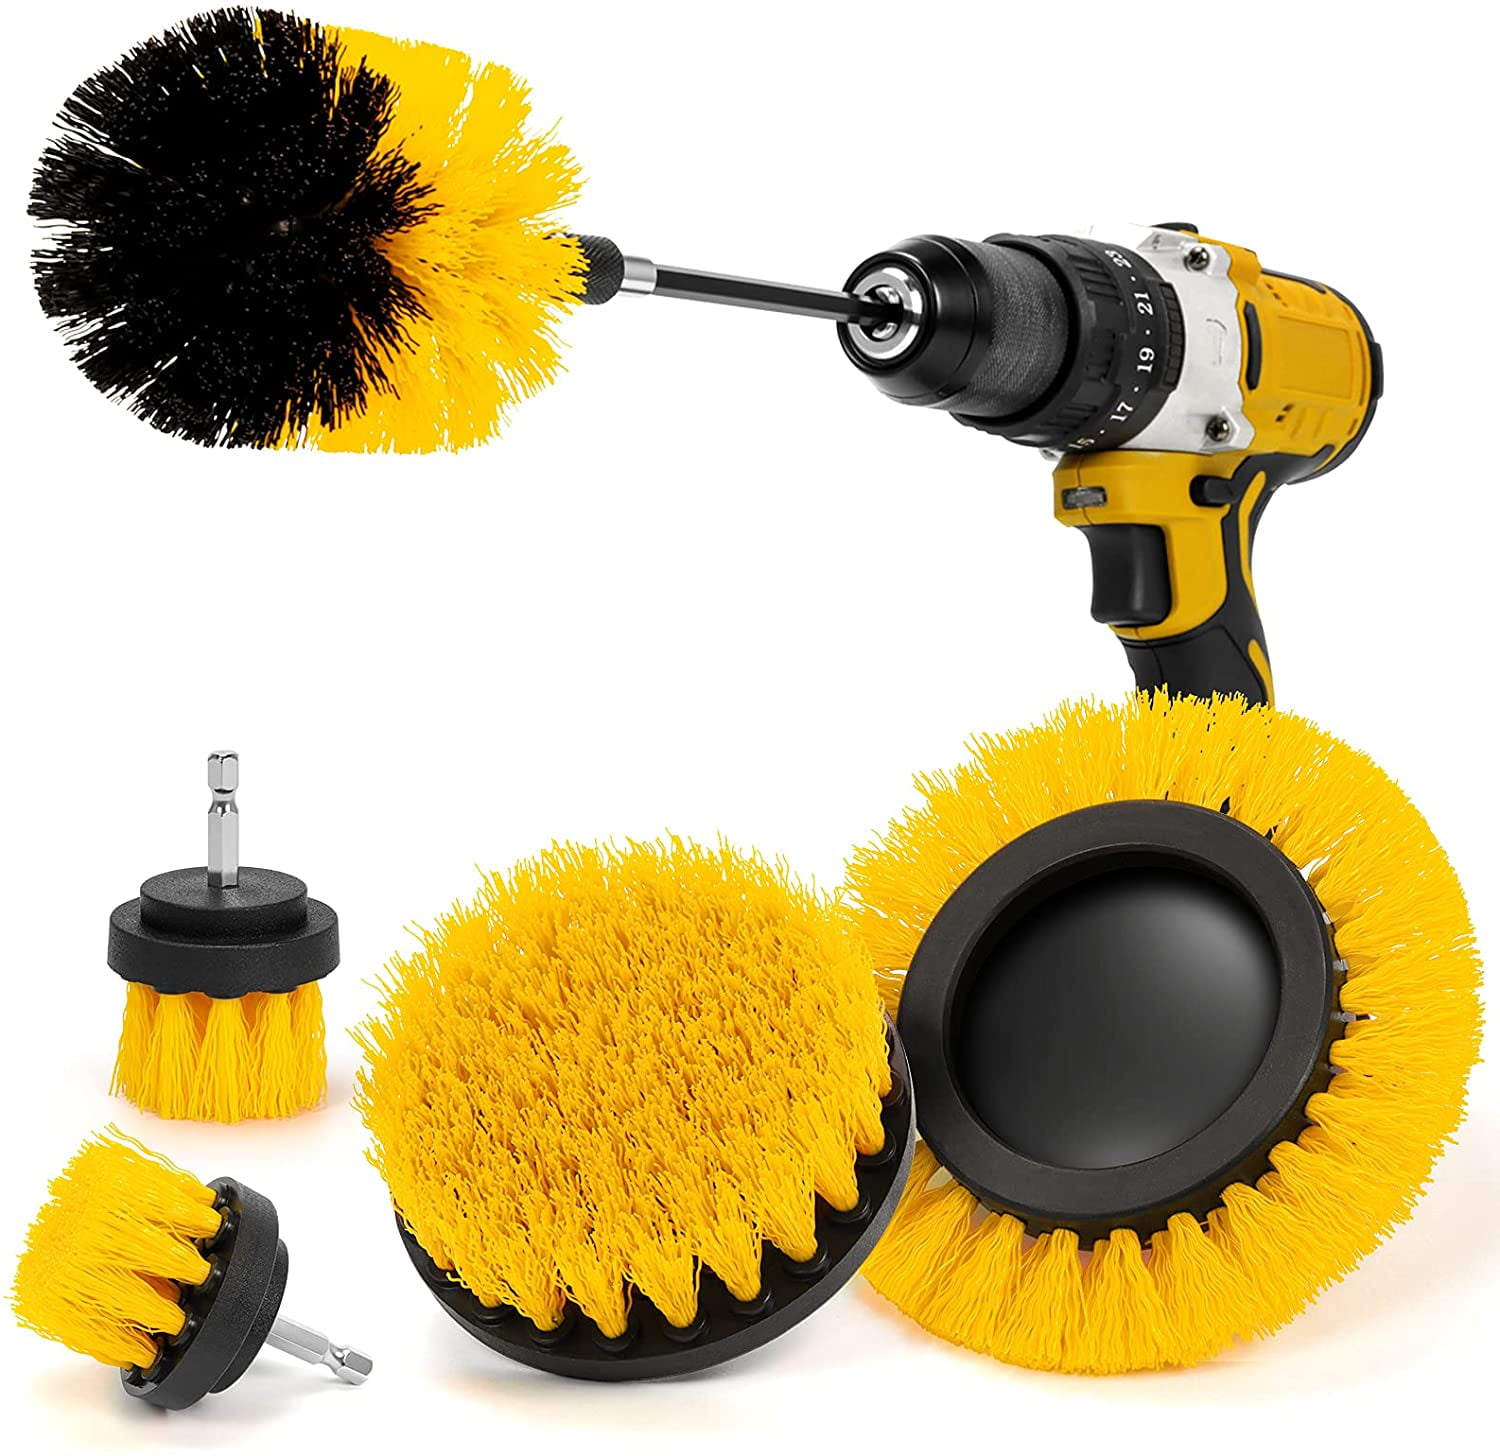 Shower Tile 9 in 1- Yellow Fits Most Drills Floor Kitchen Power Scrubber Brush Cleaning Kit for Cleaning Grout Counter Drill Brush Attachment Set All Purpose Power Drill Attachments 